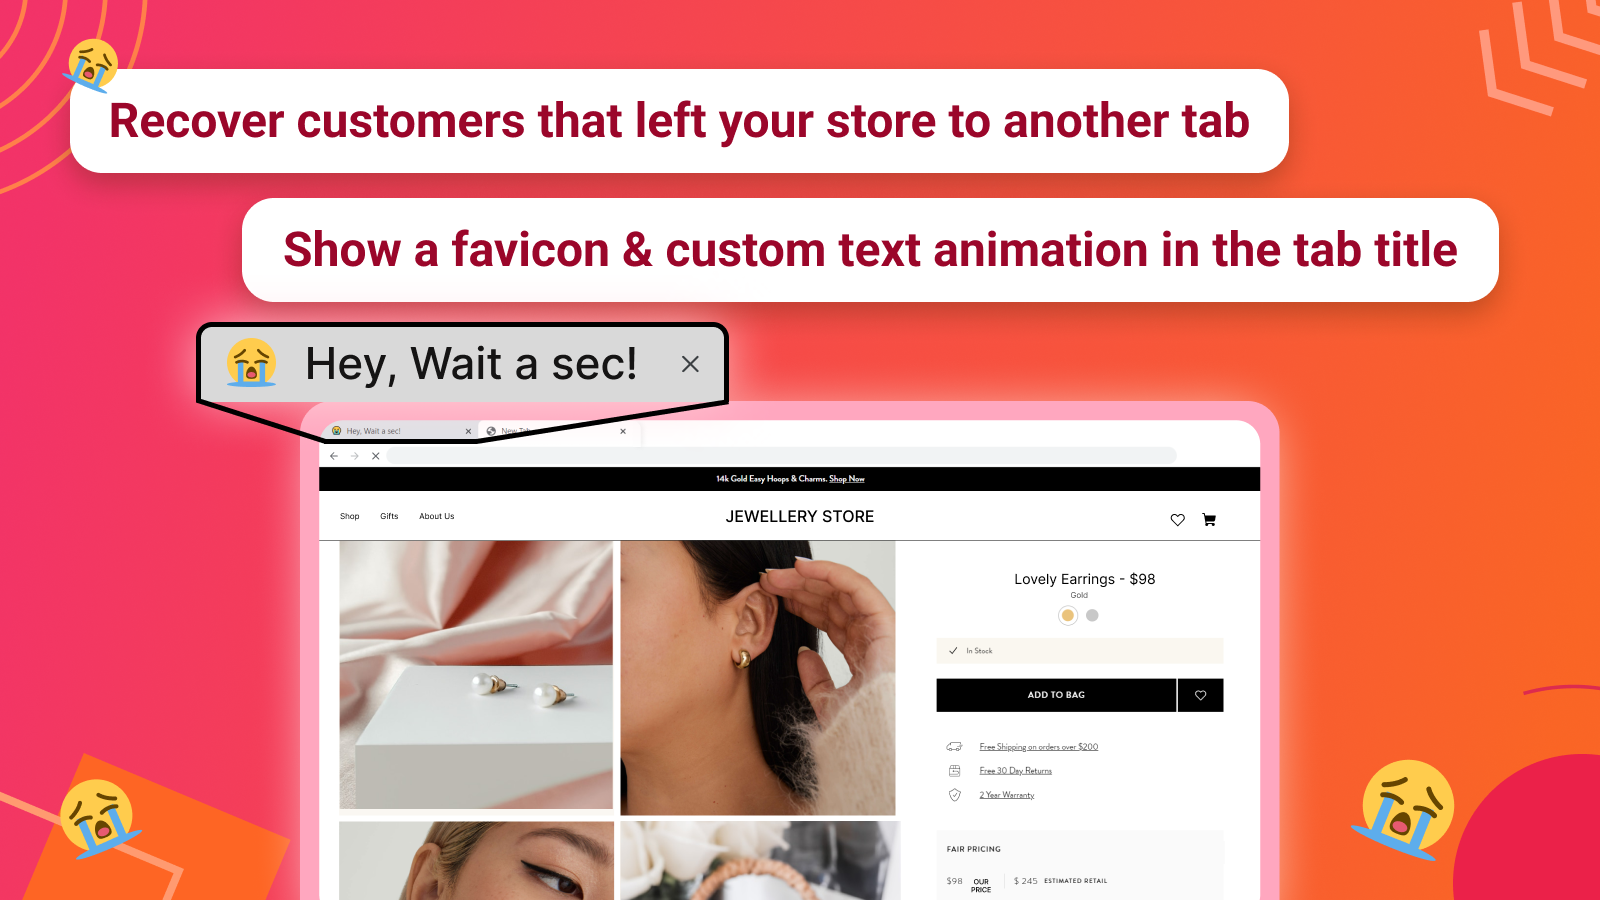 The animation in action: The text of the store's tab is blinking